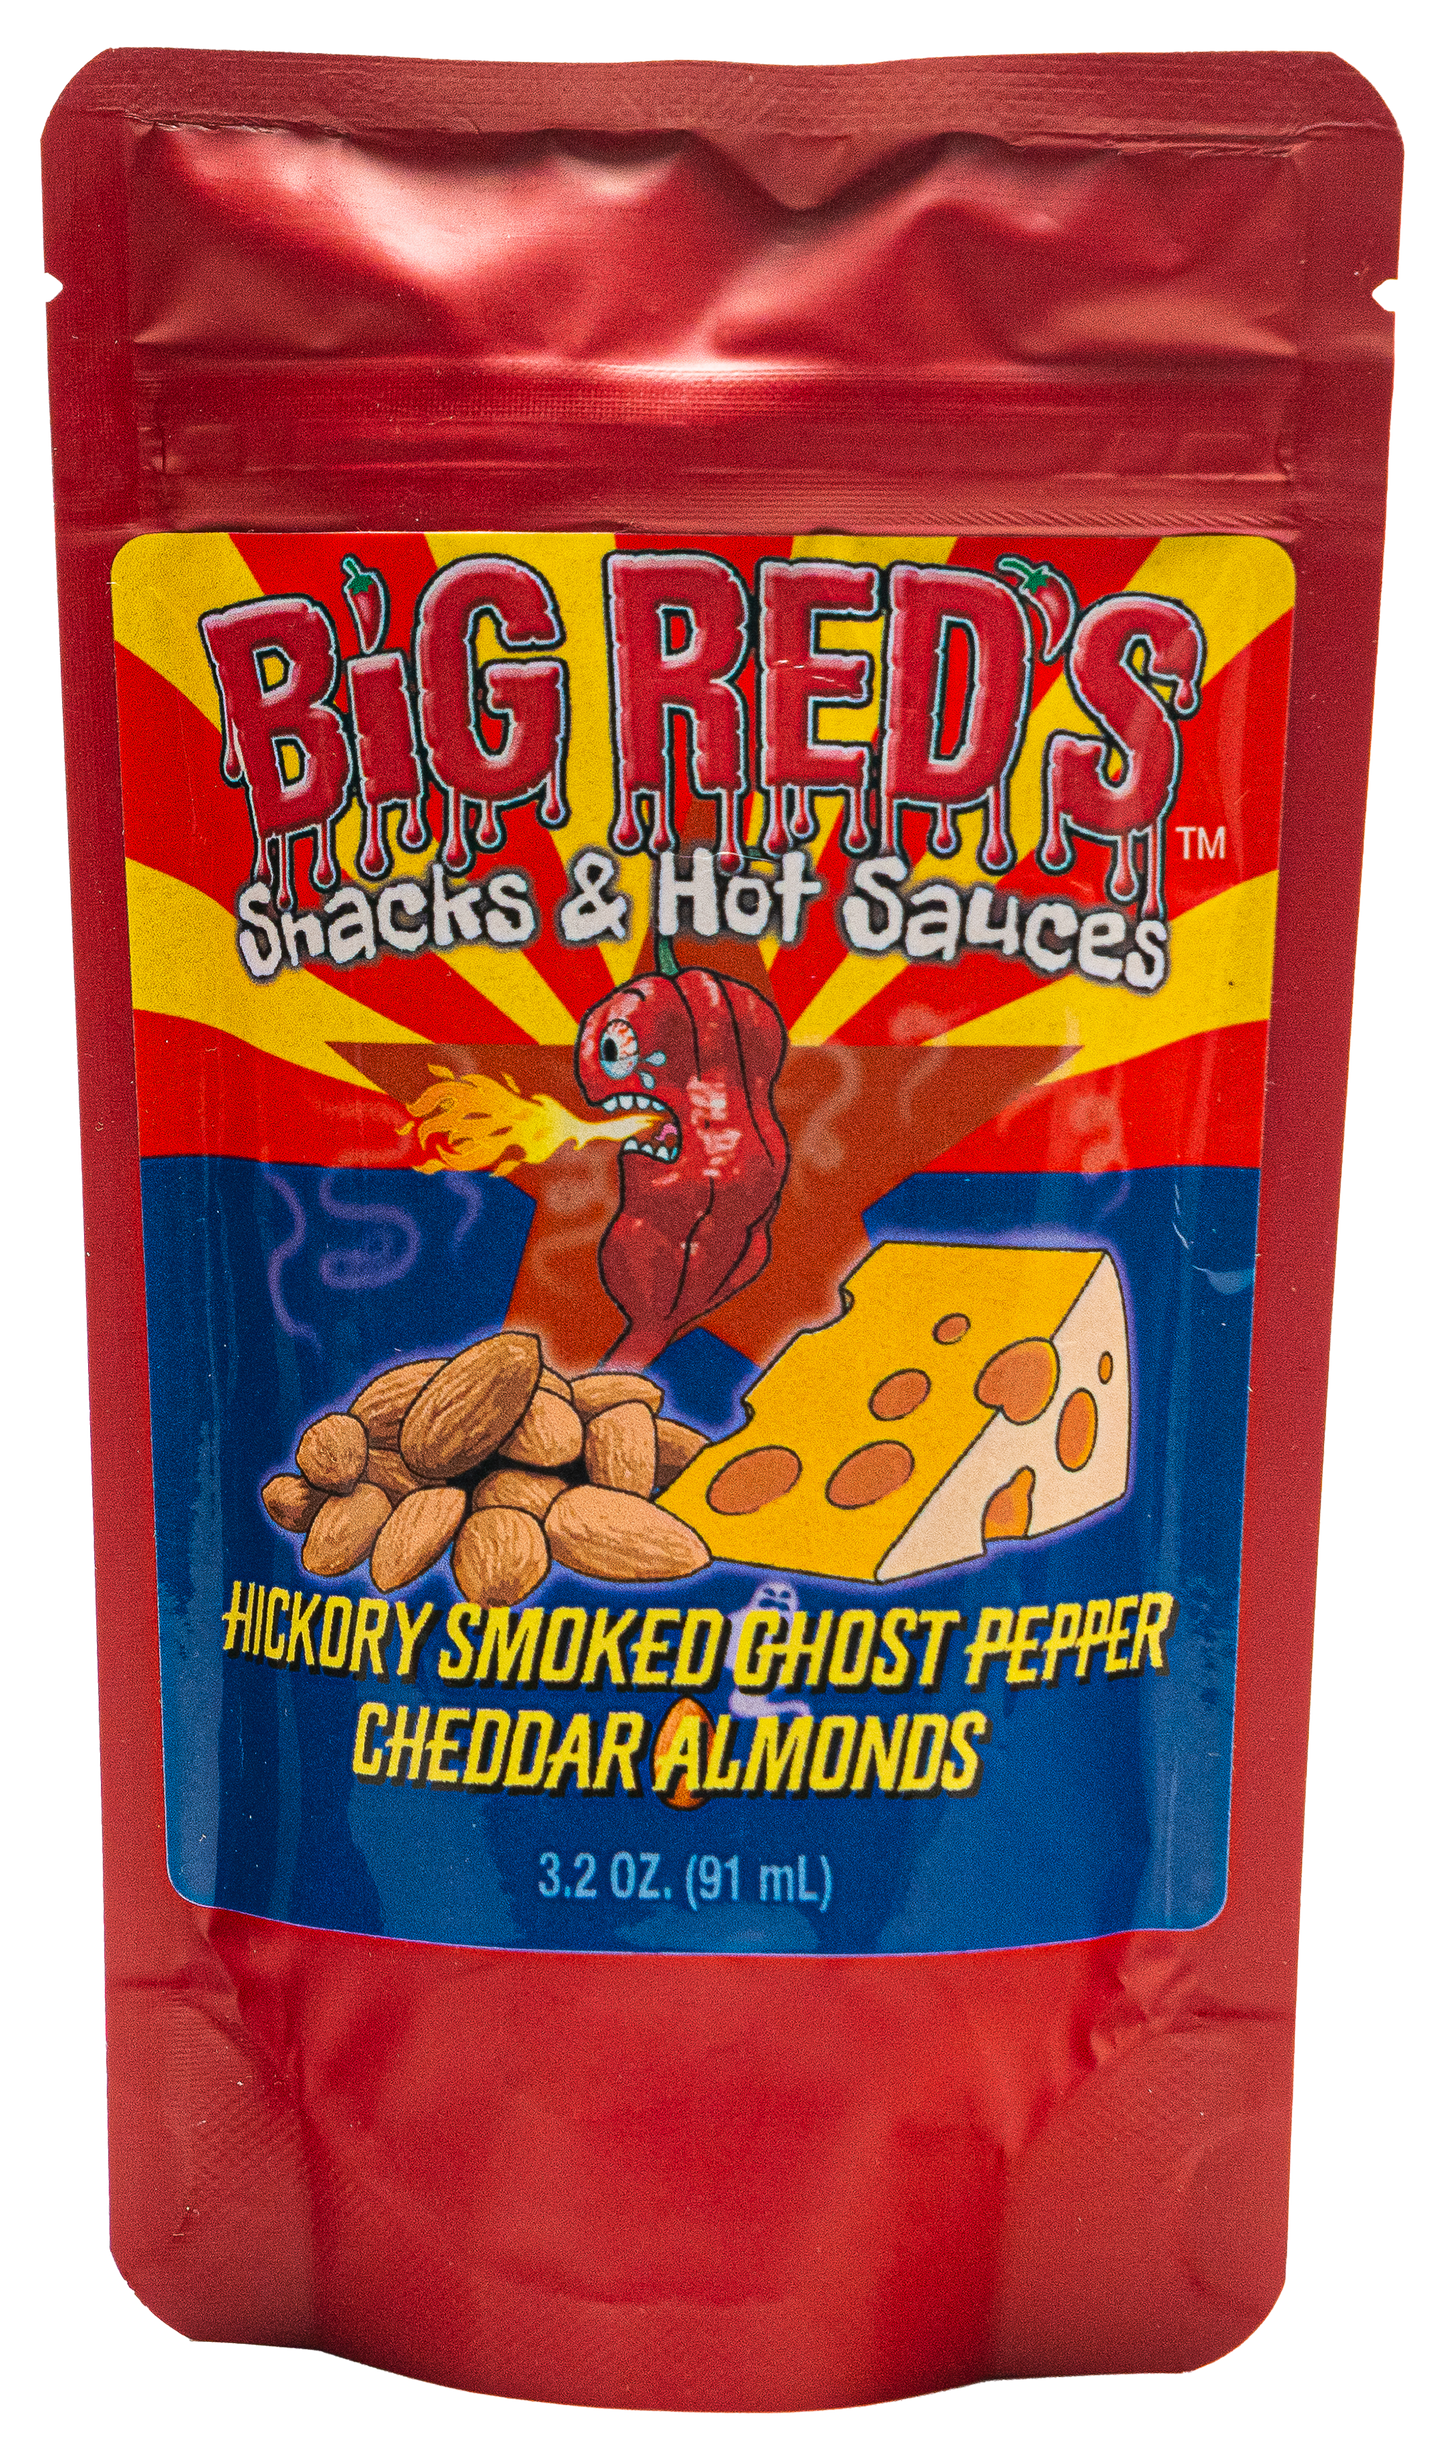 Hickory Smoked Ghost Pepper Cheddar Almonds